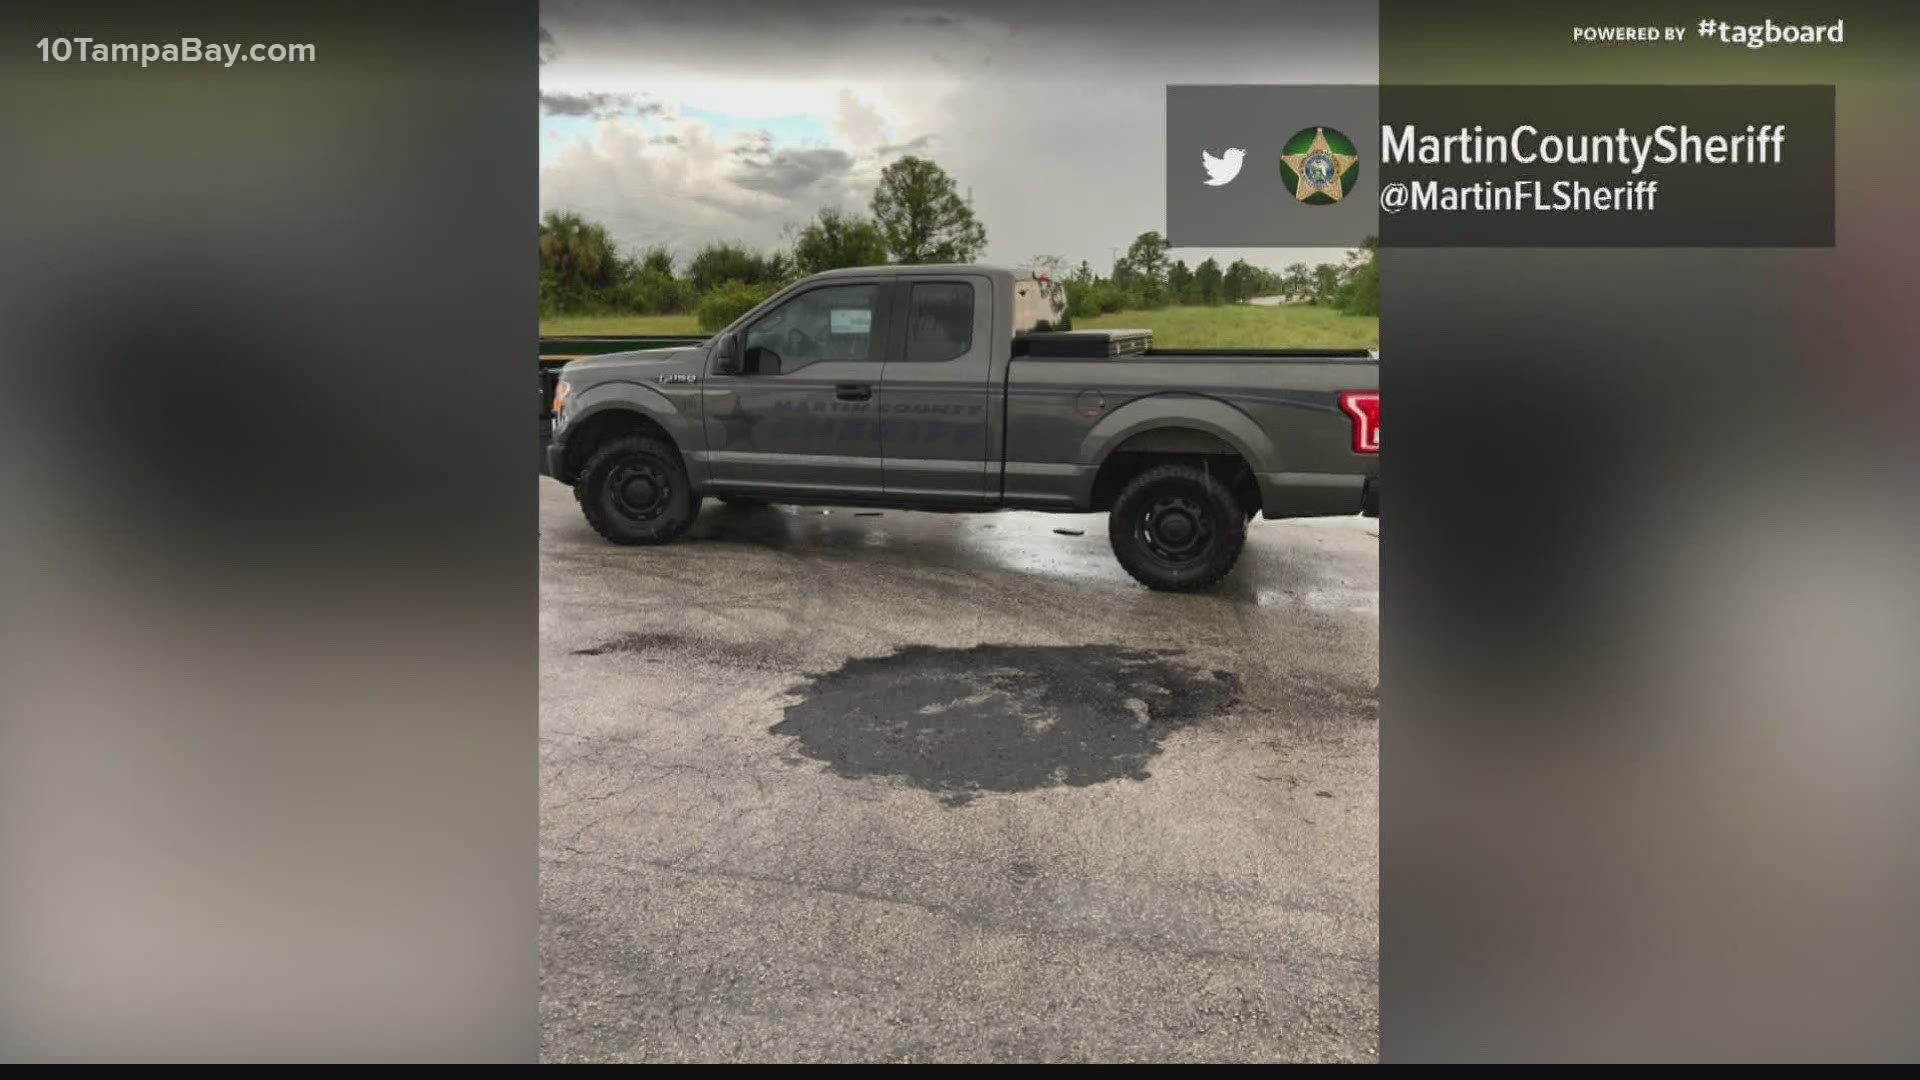 The Martin County Sheriff's Office said lightning struck right outside of an agriculture detective's truck while he was inside.